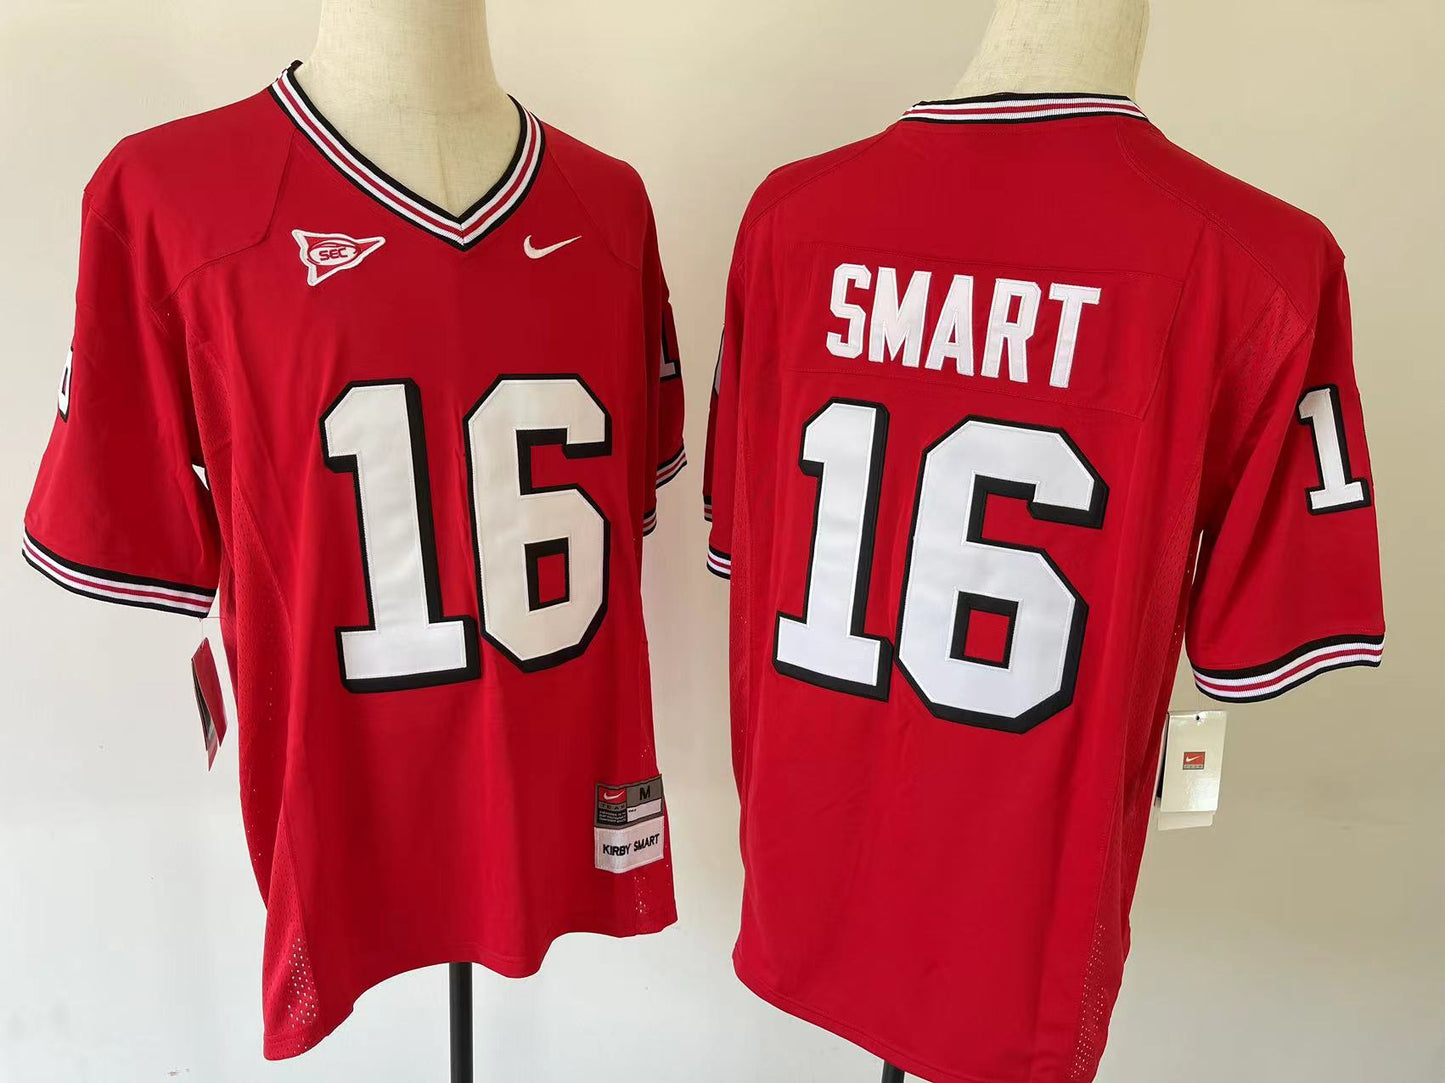 Kirby Smart Georgia Bulldogs Nike NCAA College Football Classic Campus Legends Home Jersey - Red